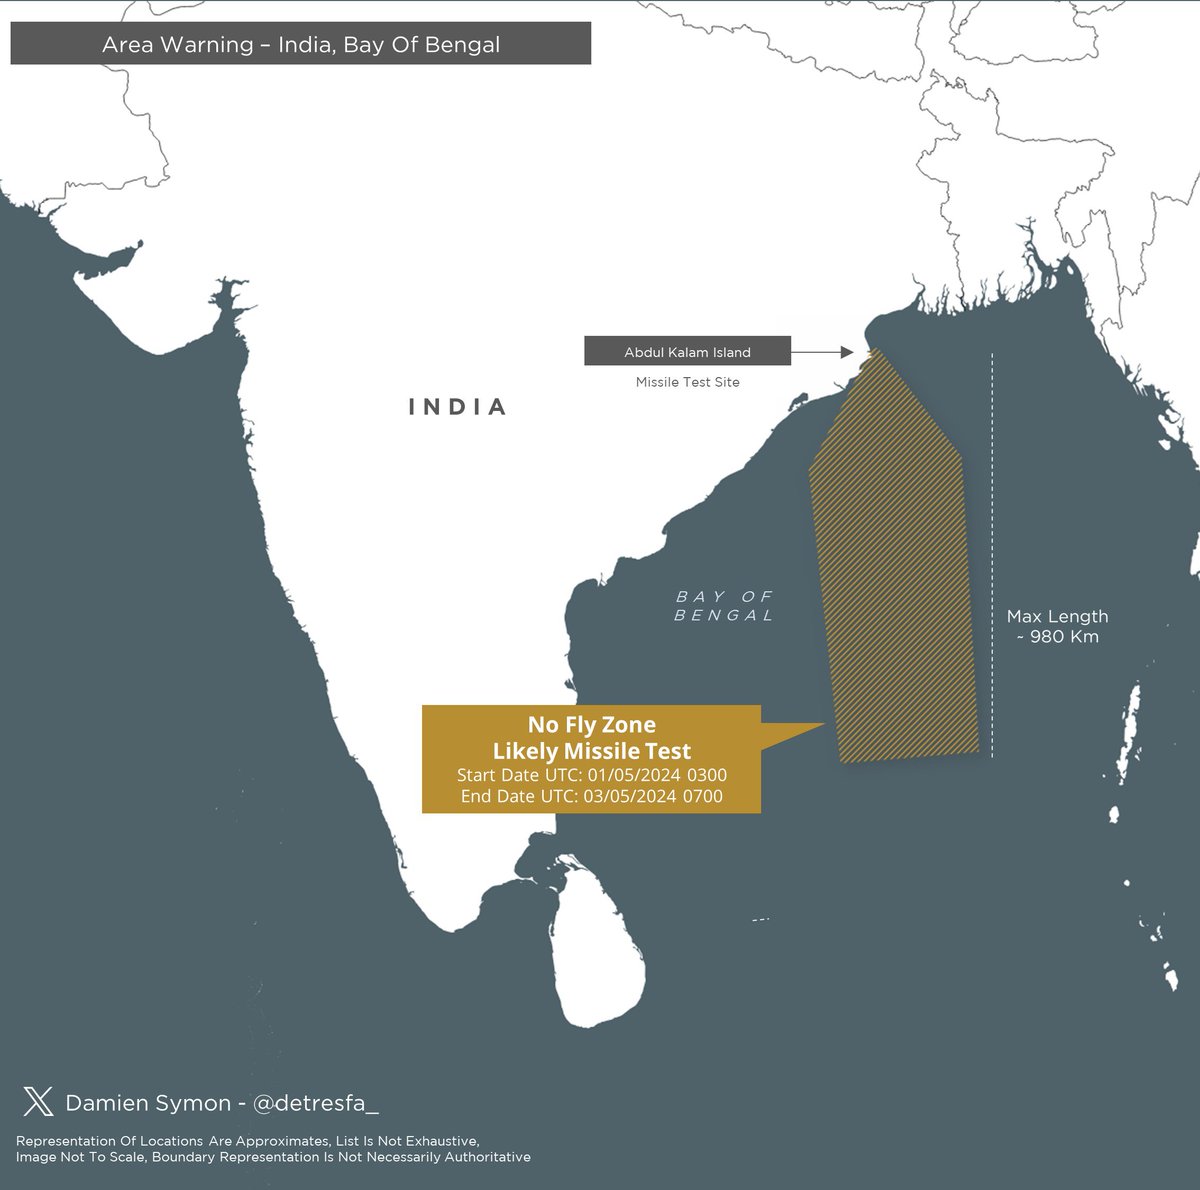 #AreaWarning #India issues a notification for a no fly zone over the Bay Of Bengal Region indicative of a likely missile test - Date | 01-03 May 2024